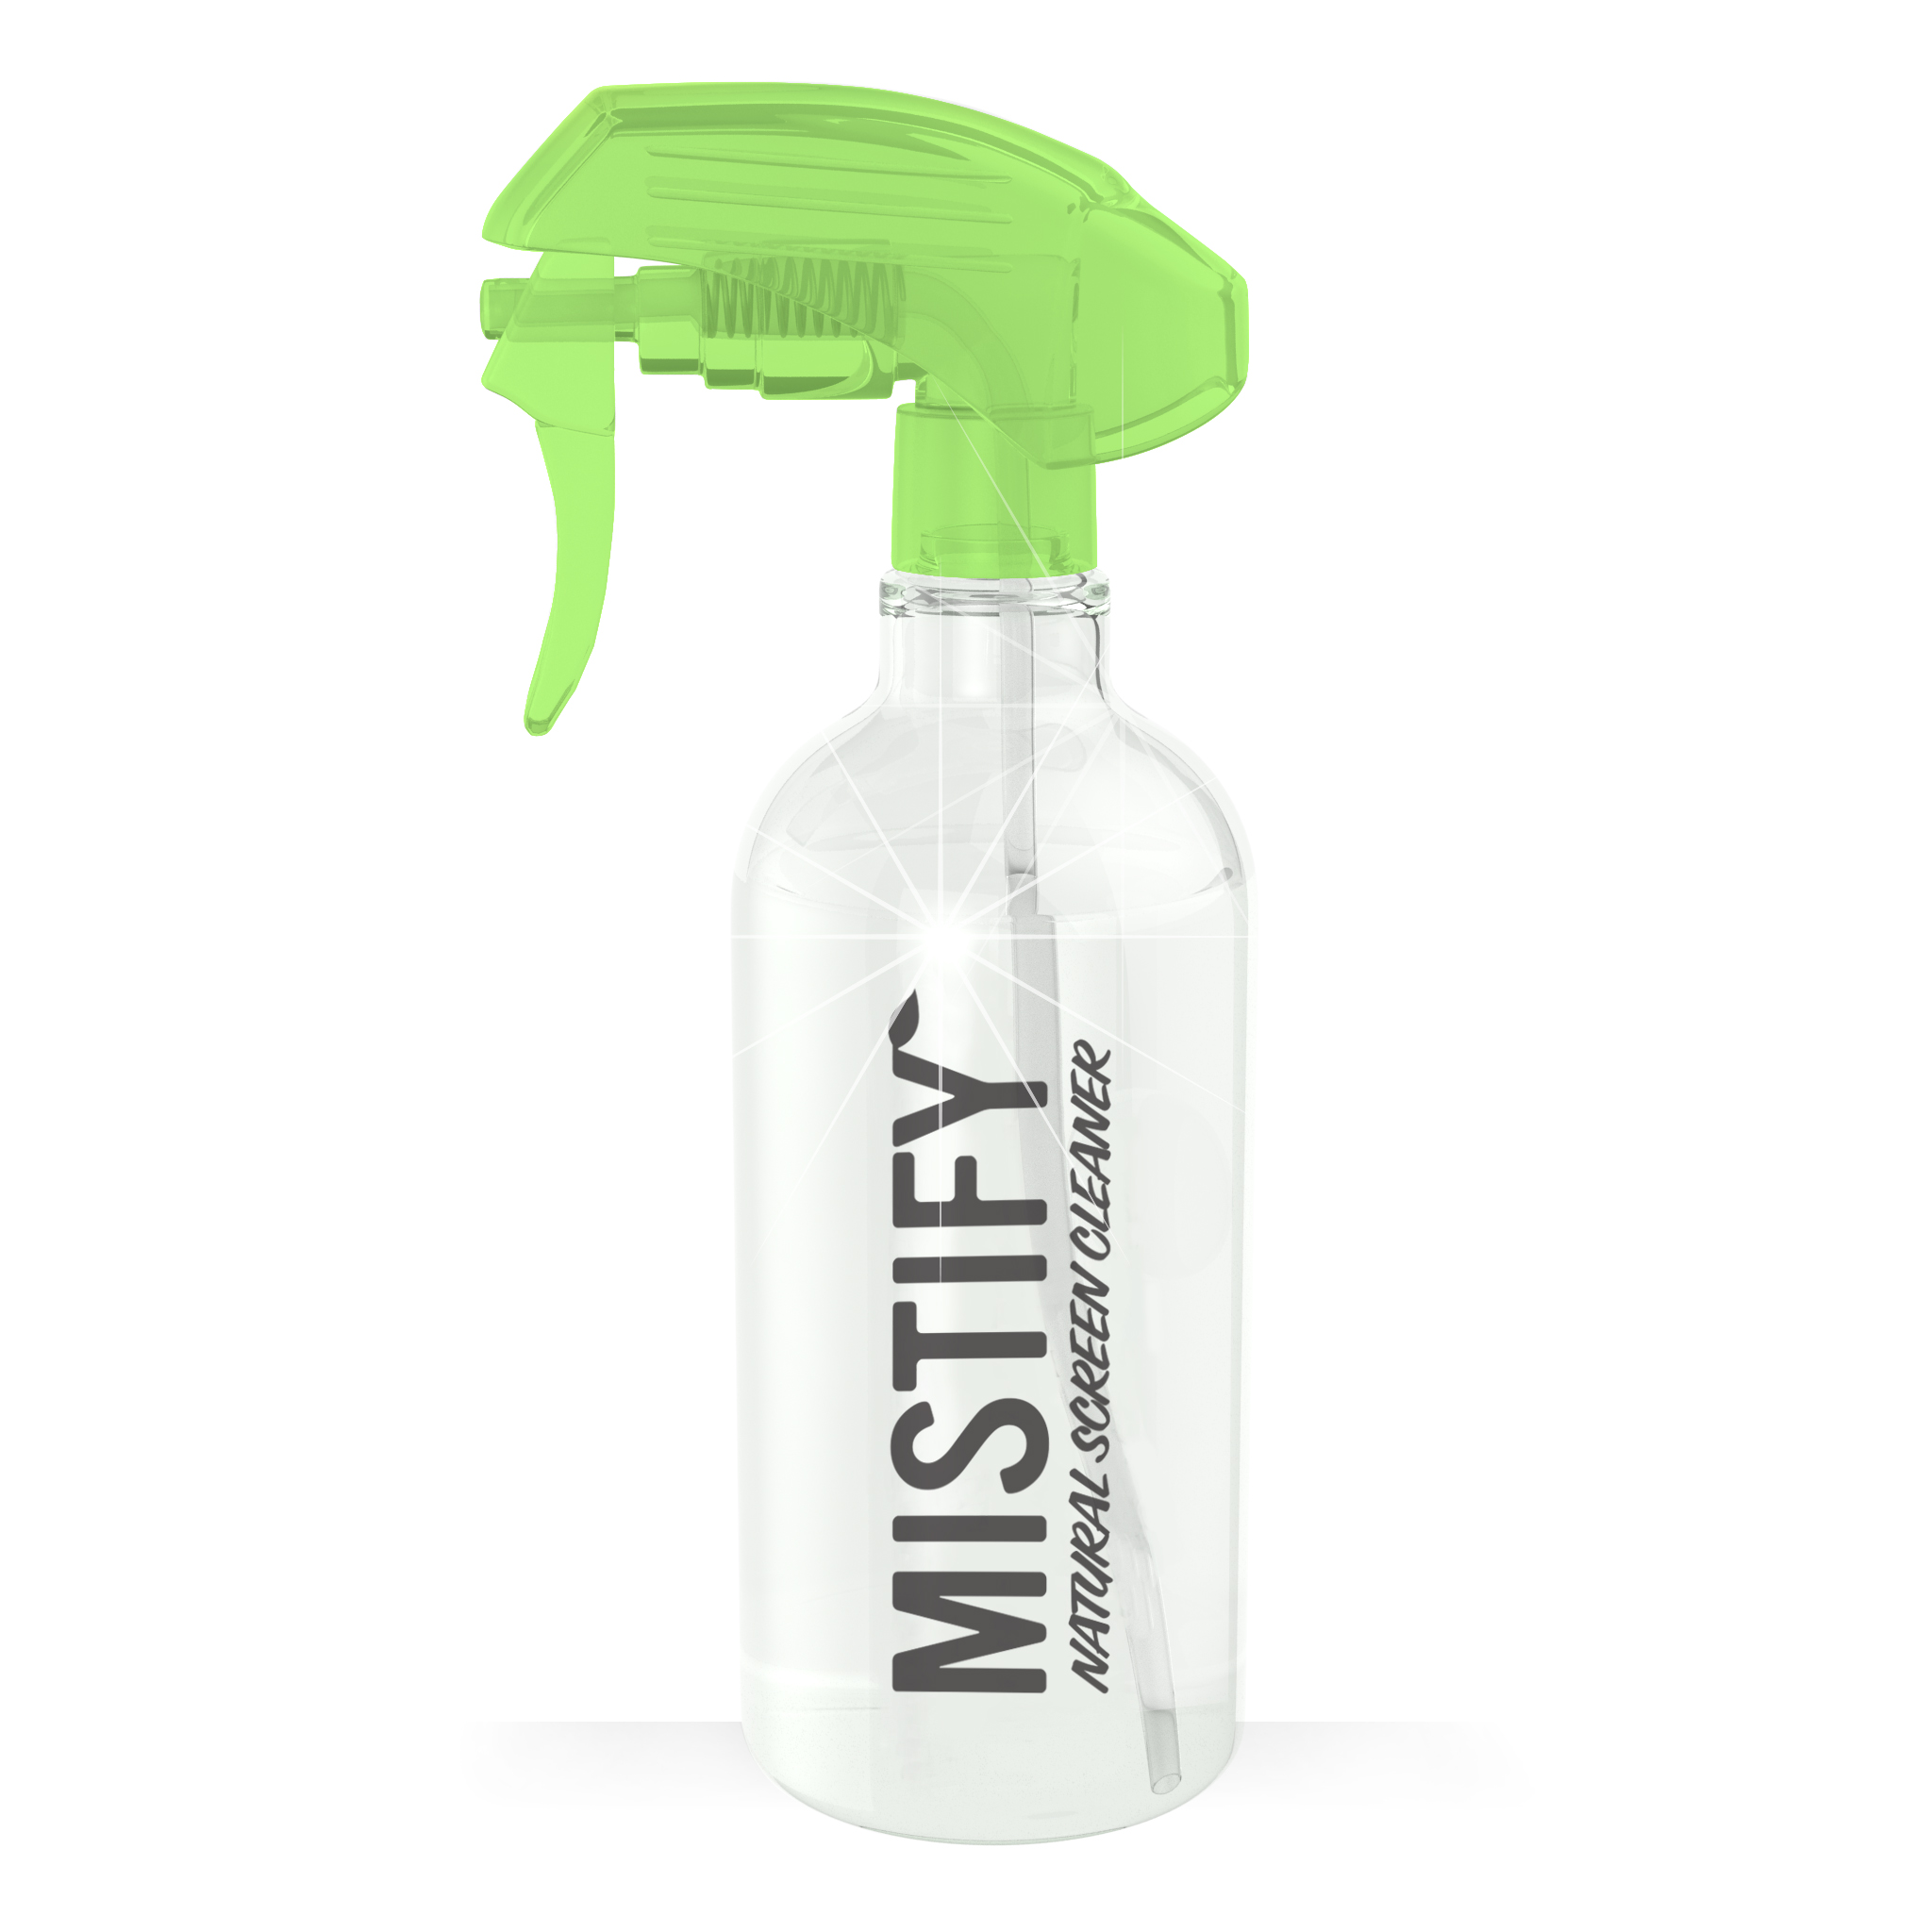 Mistify Natural Screen Cleaner 500ml spray bottle.